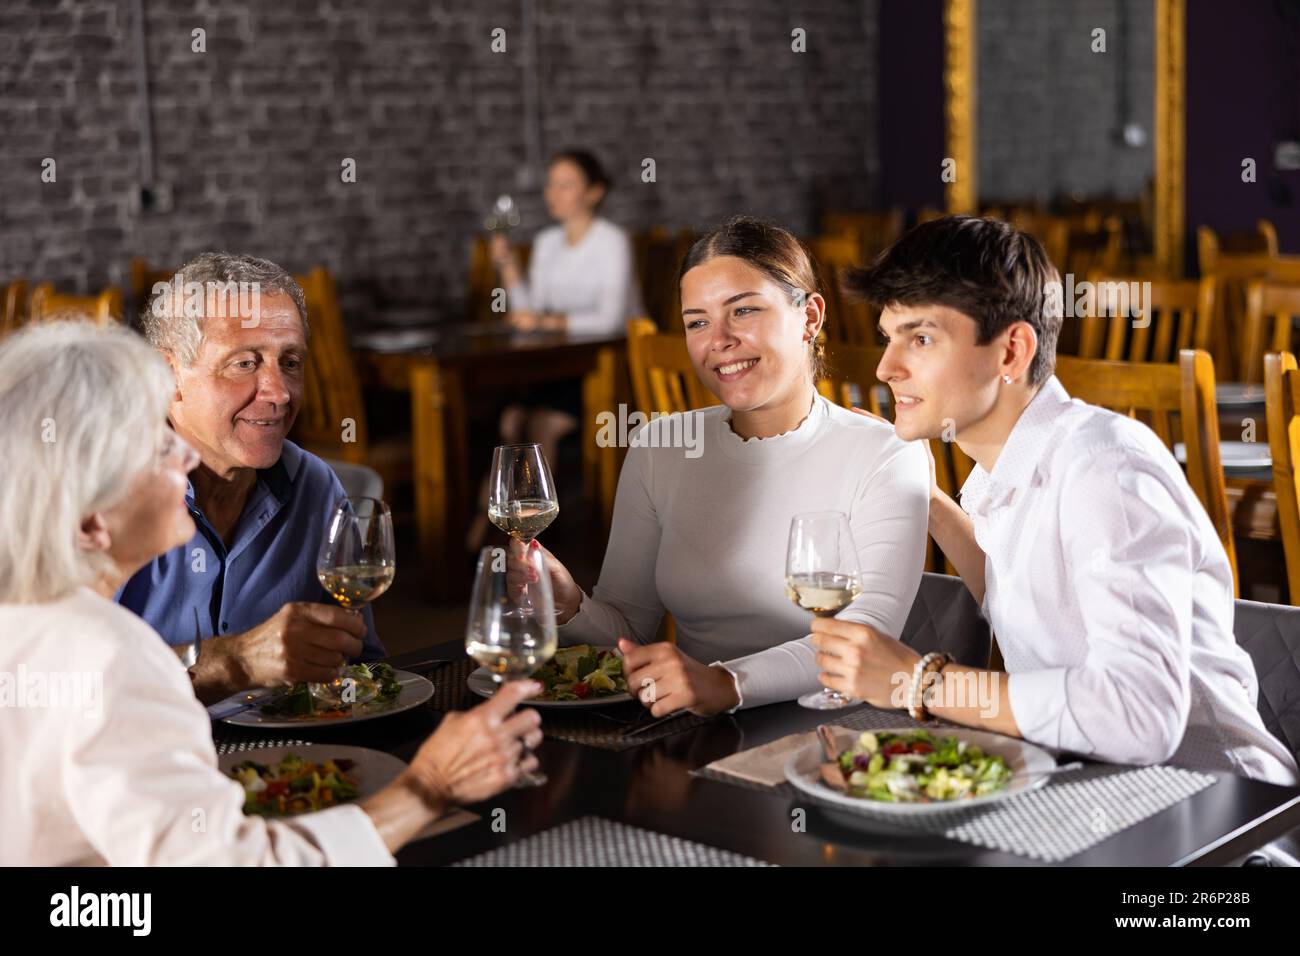 Young family and elderly couple of spouses eating in cafe celebrating event and communicating Stock Photo